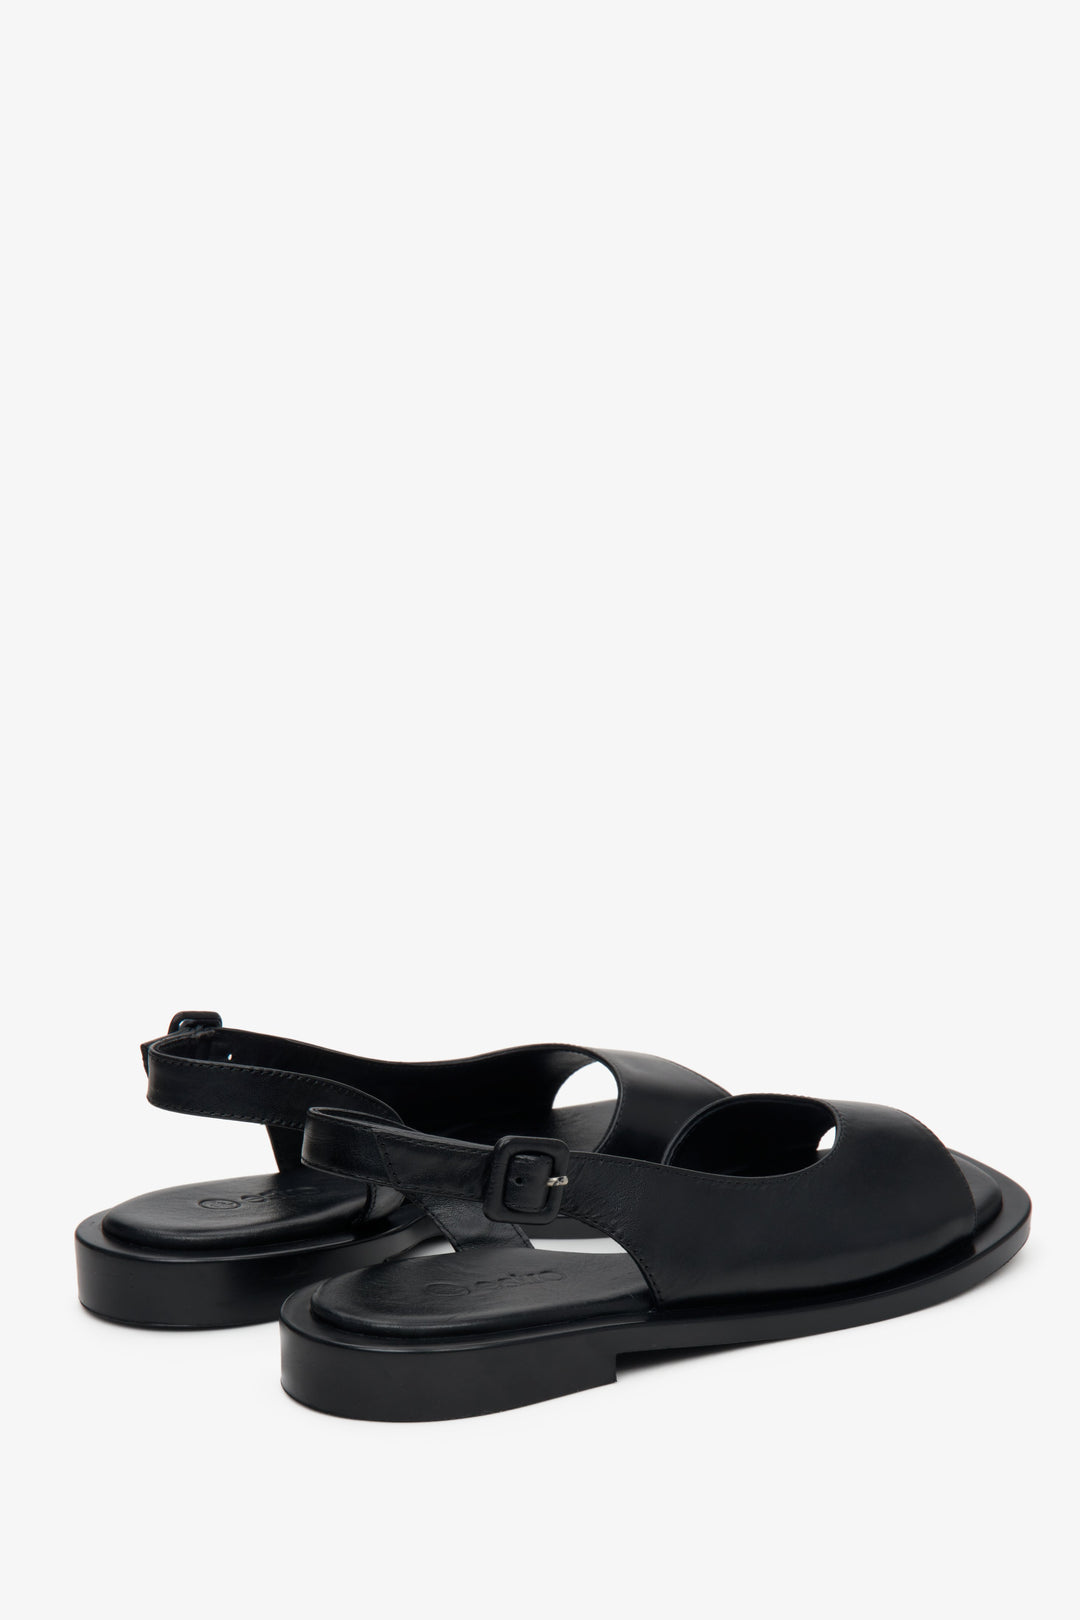 Women's black leather Estro sandals - presentation of the back of the footwear.